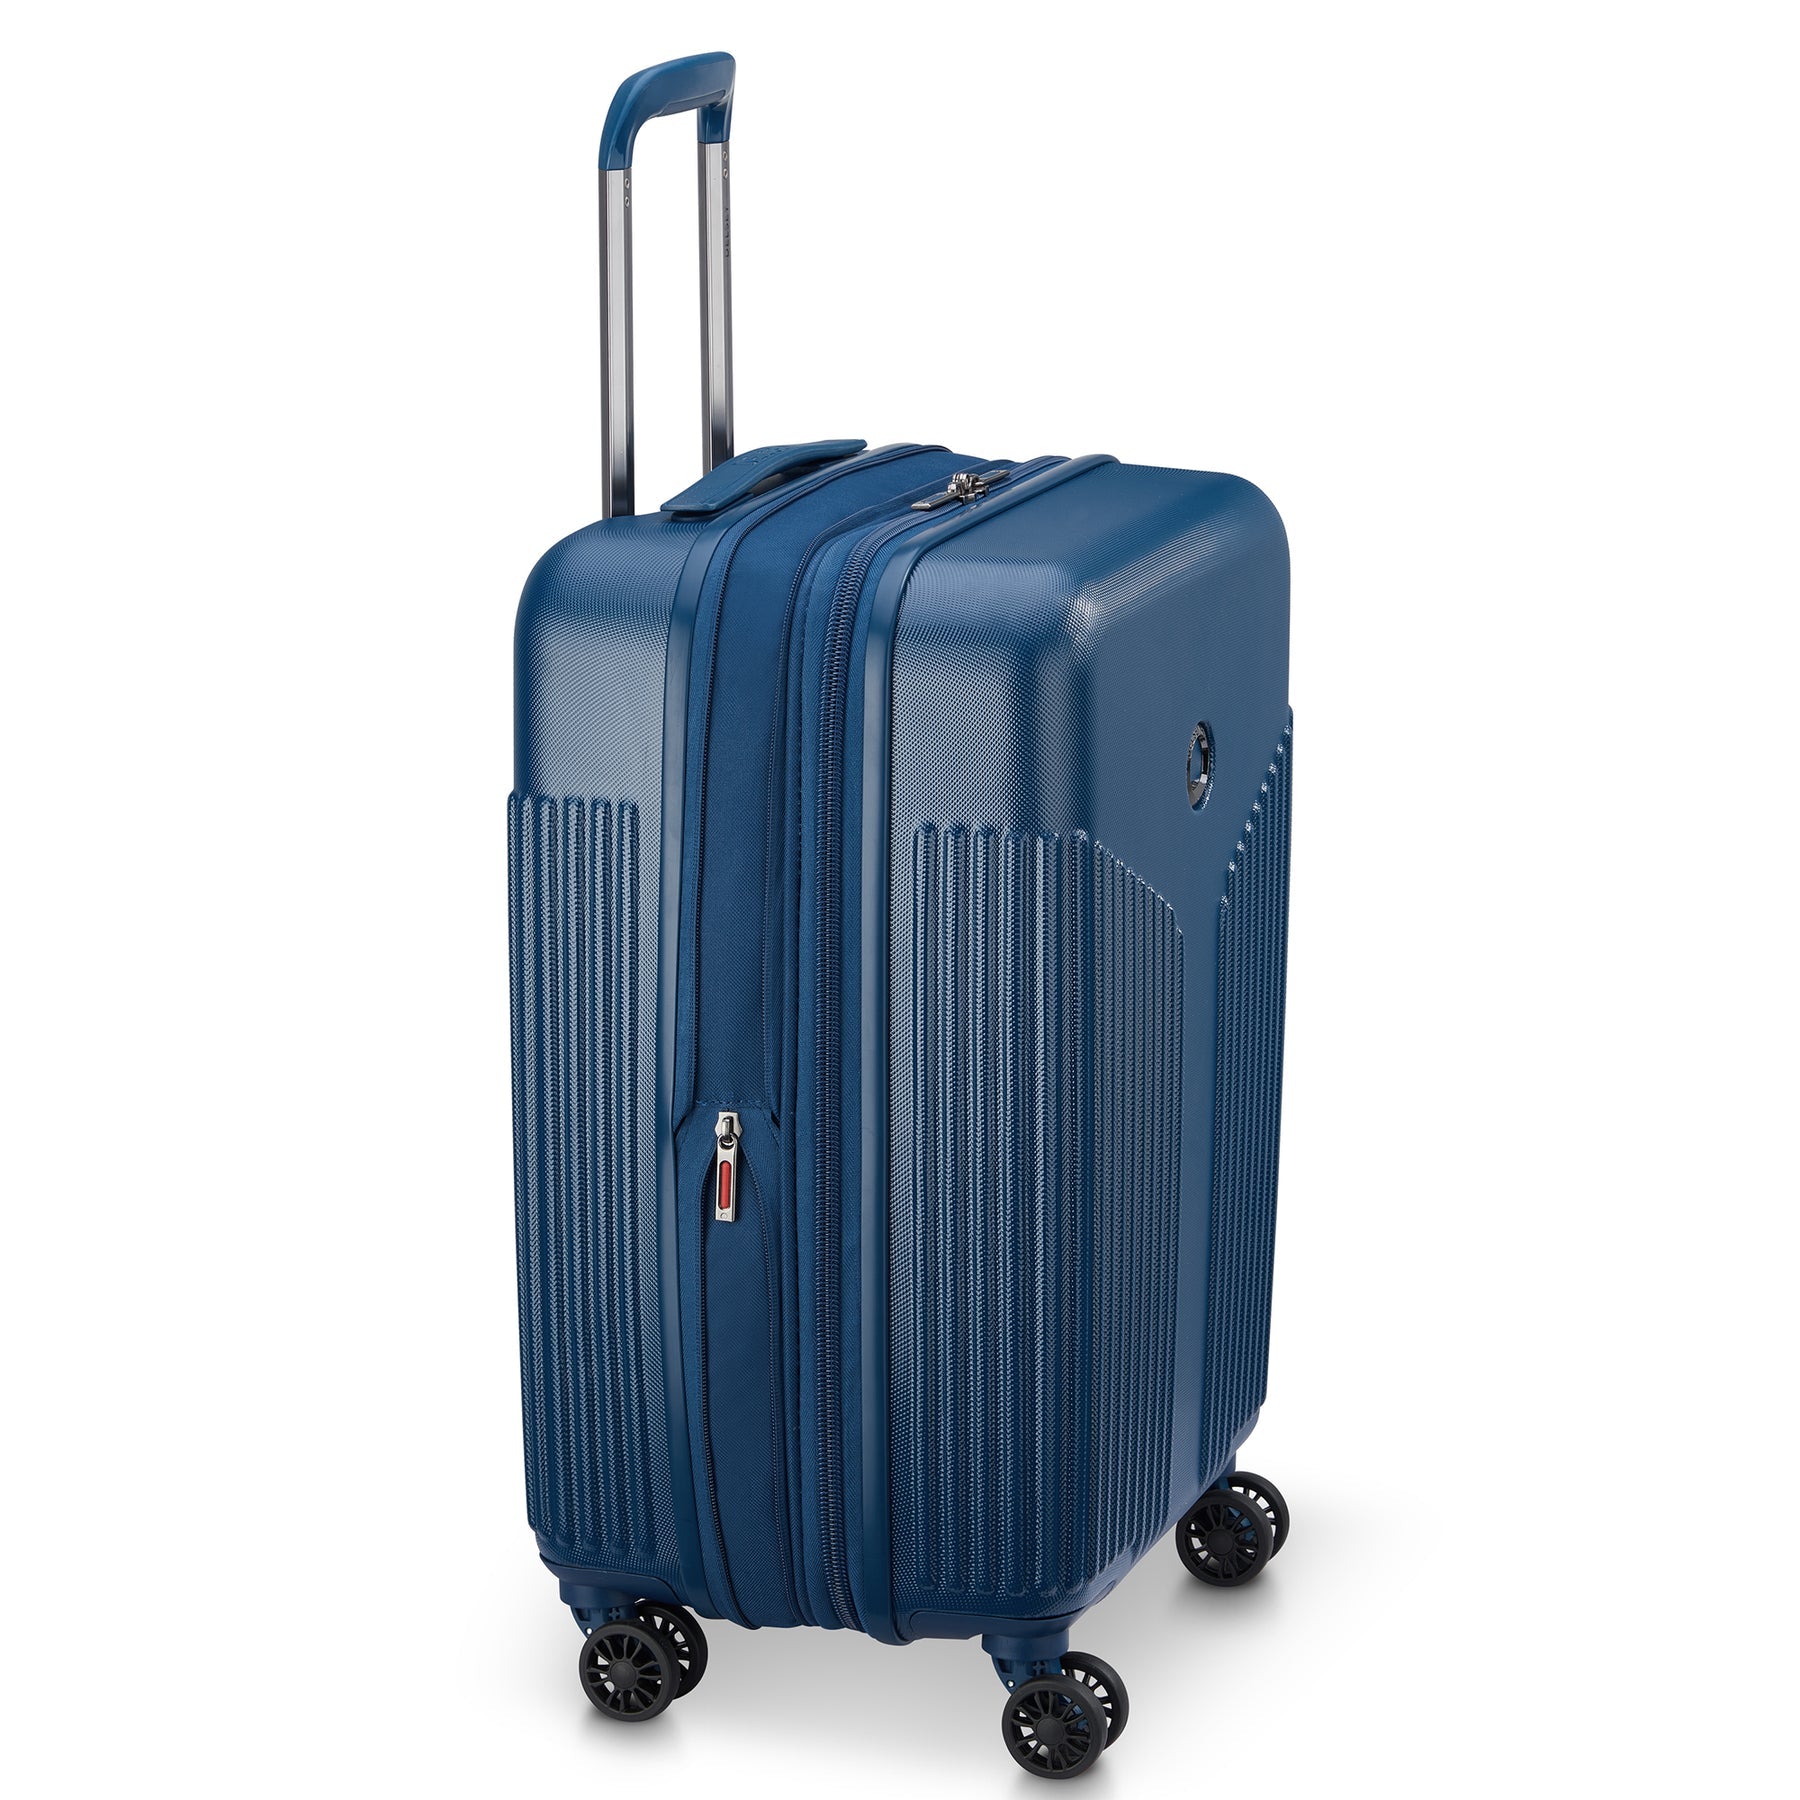 COMETE 3.0 CARRY-ON - 21" SMALL